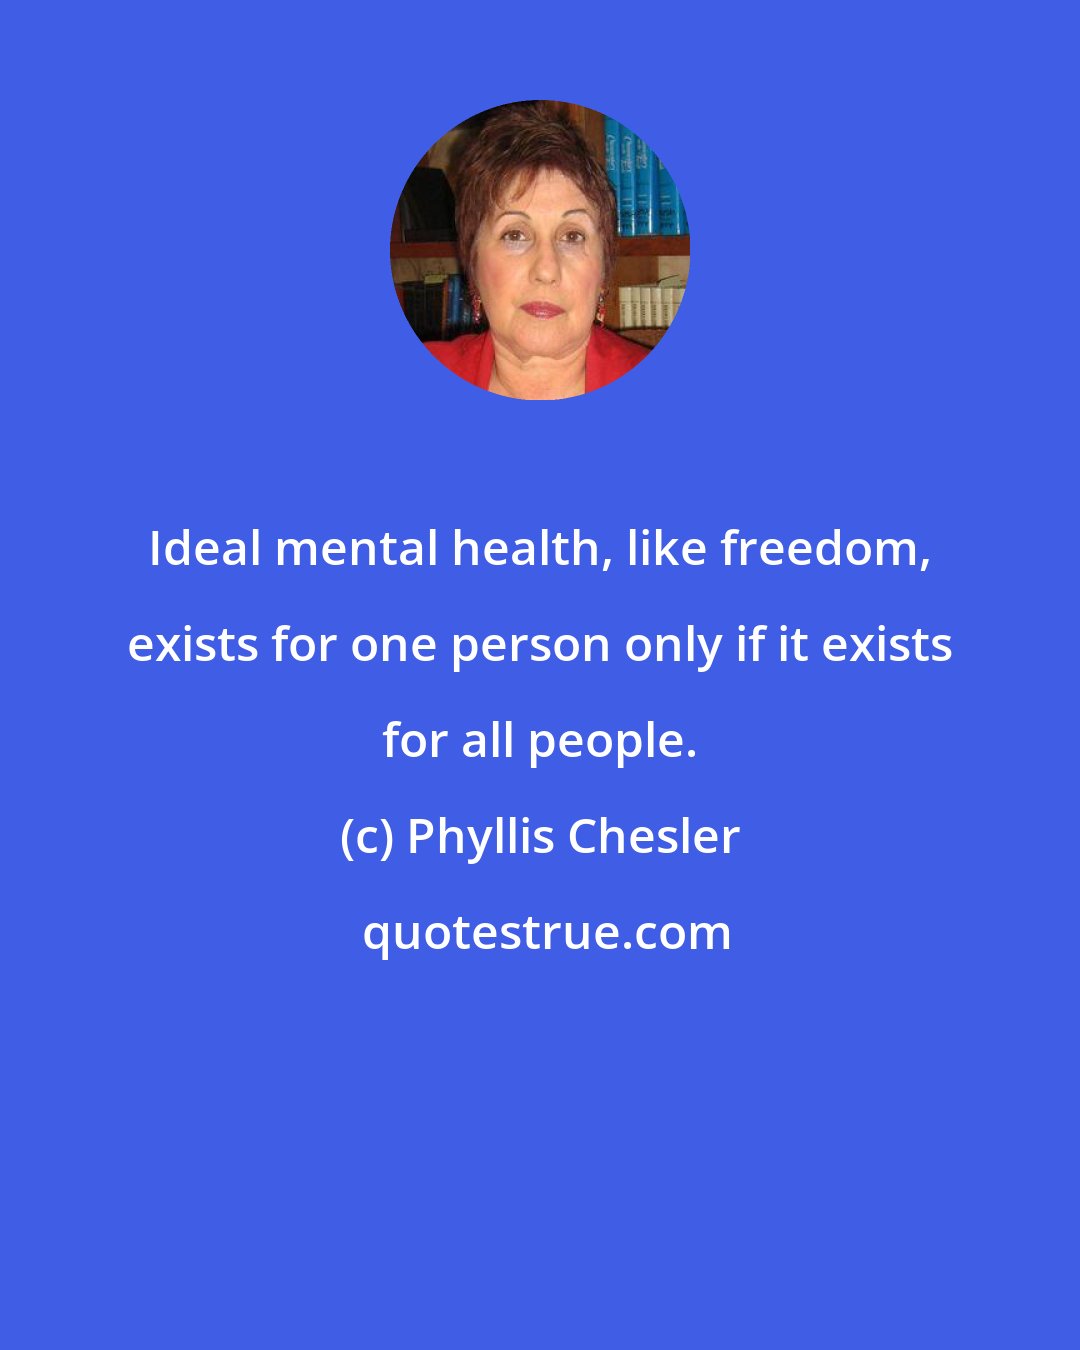 Phyllis Chesler: Ideal mental health, like freedom, exists for one person only if it exists for all people.